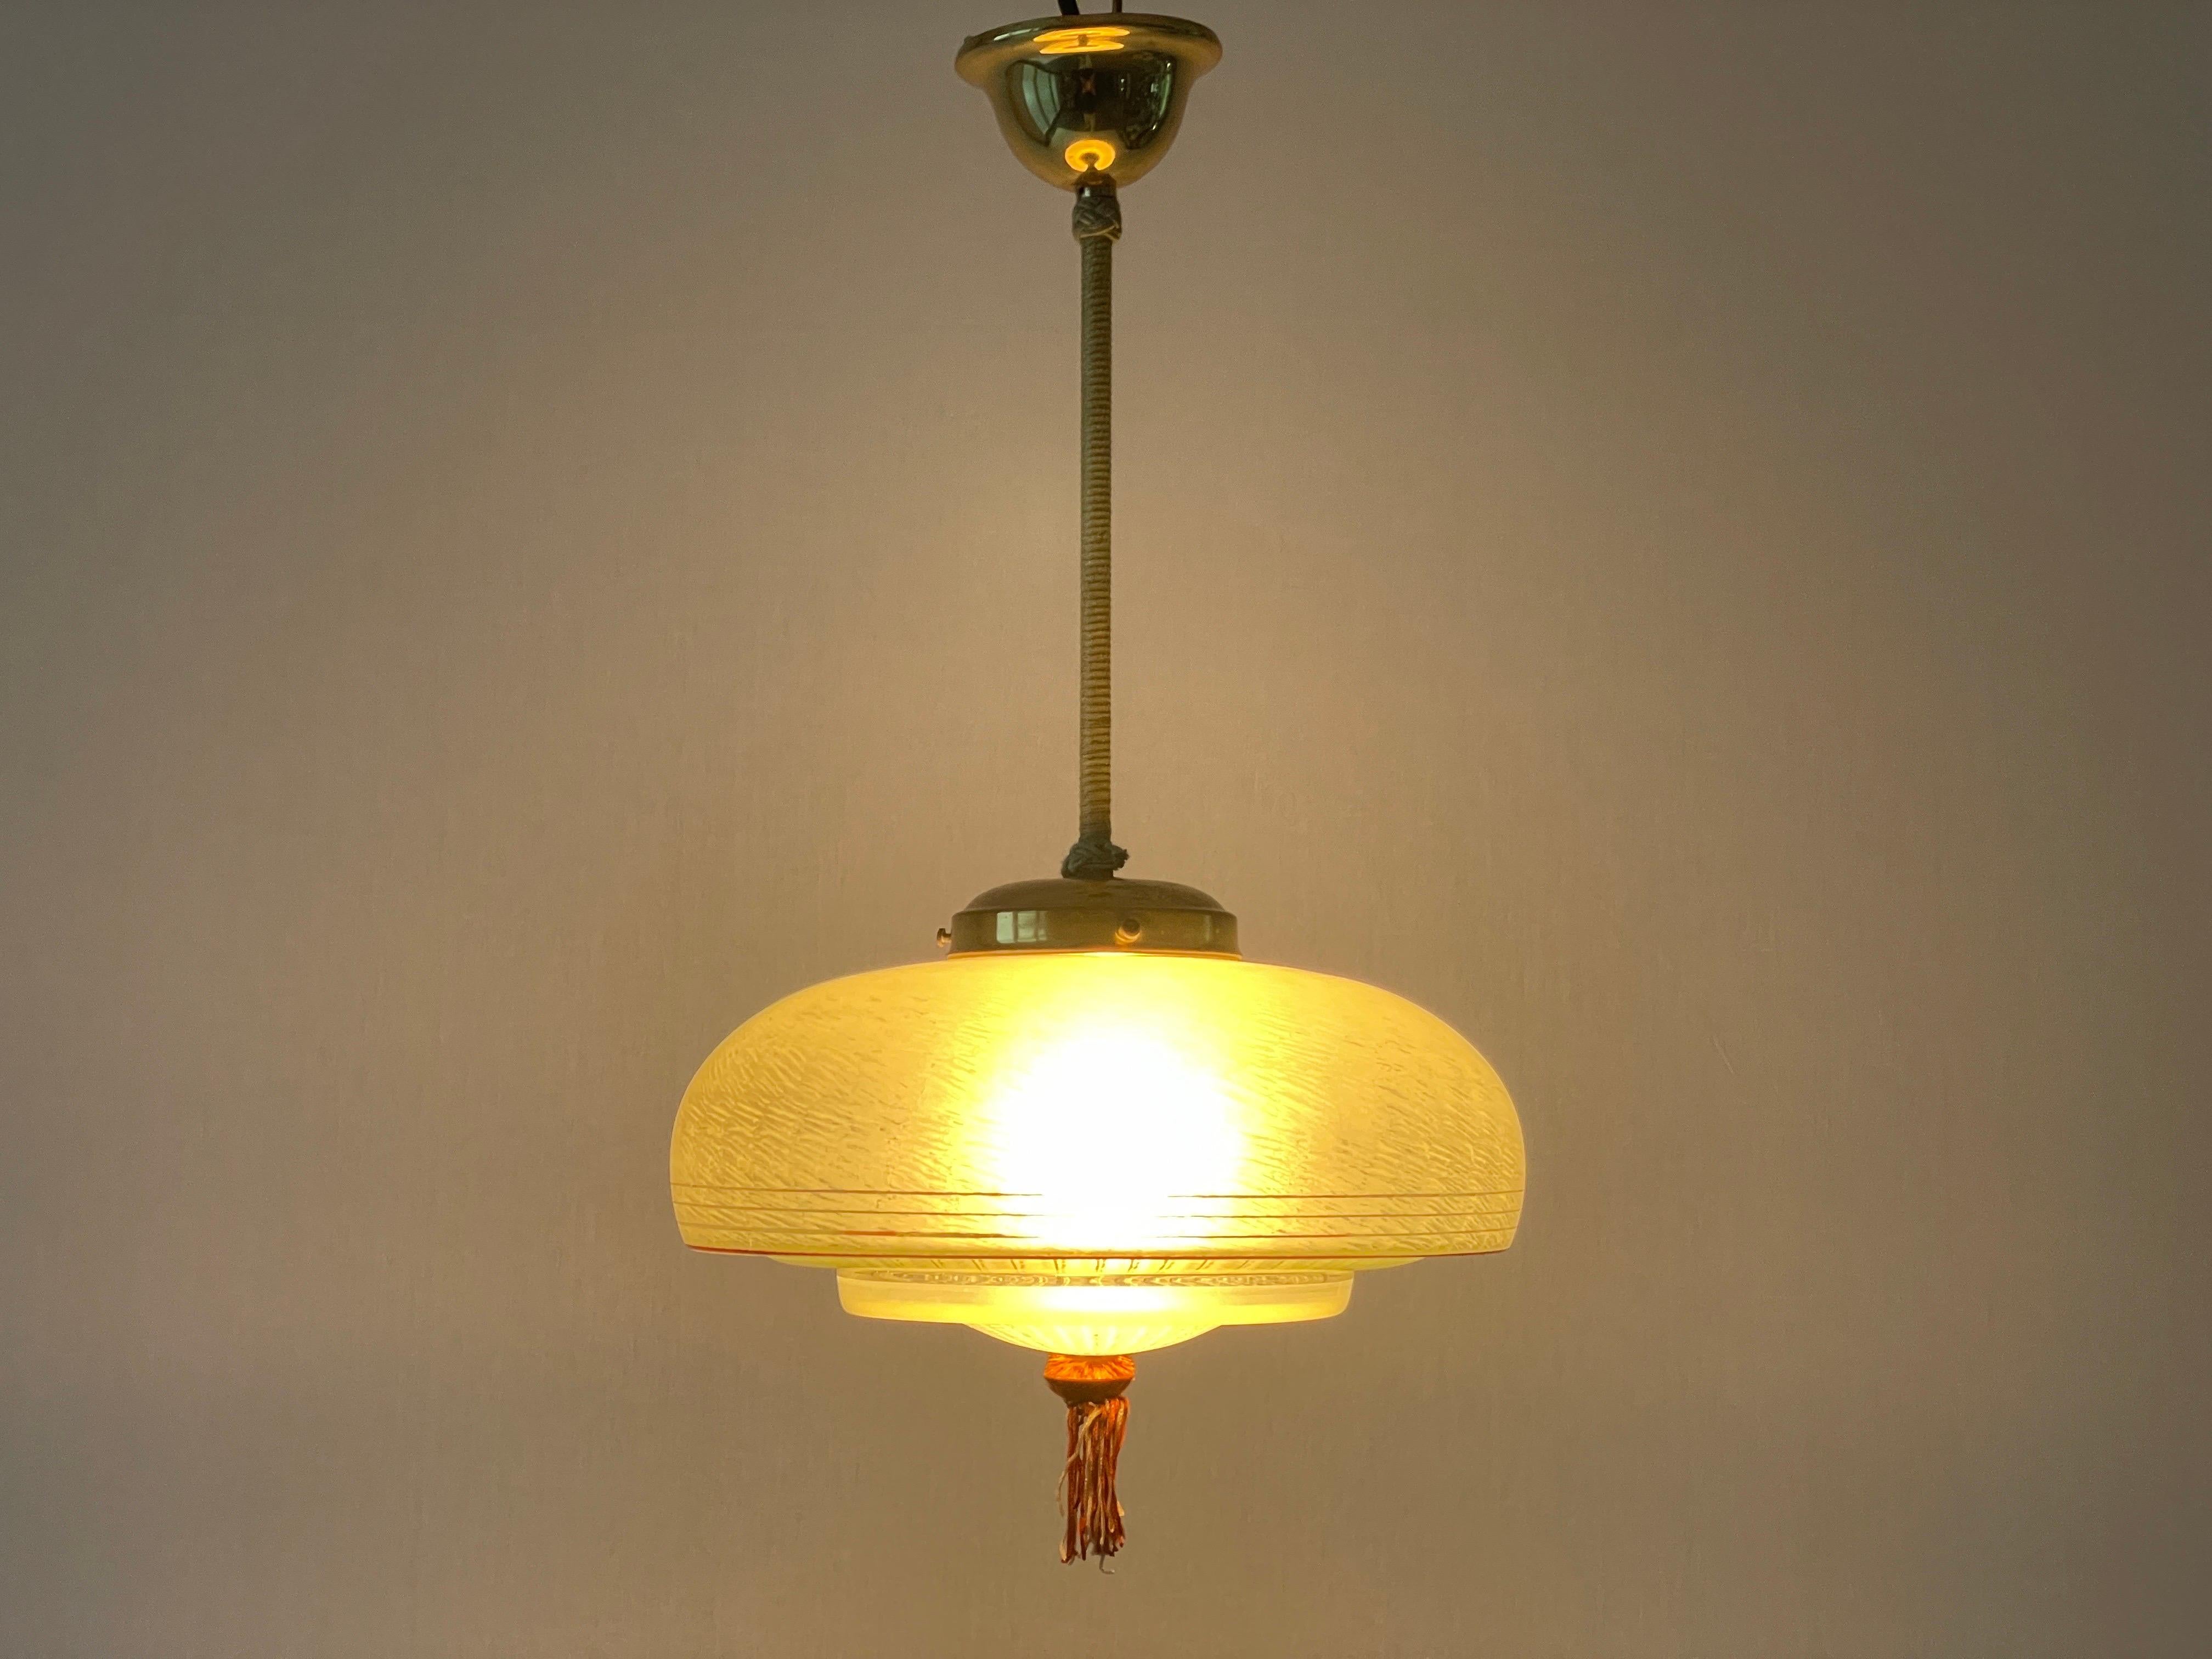 Green Glass Art Deco Style Ceiling Lamp, 1960s, Germany For Sale 7